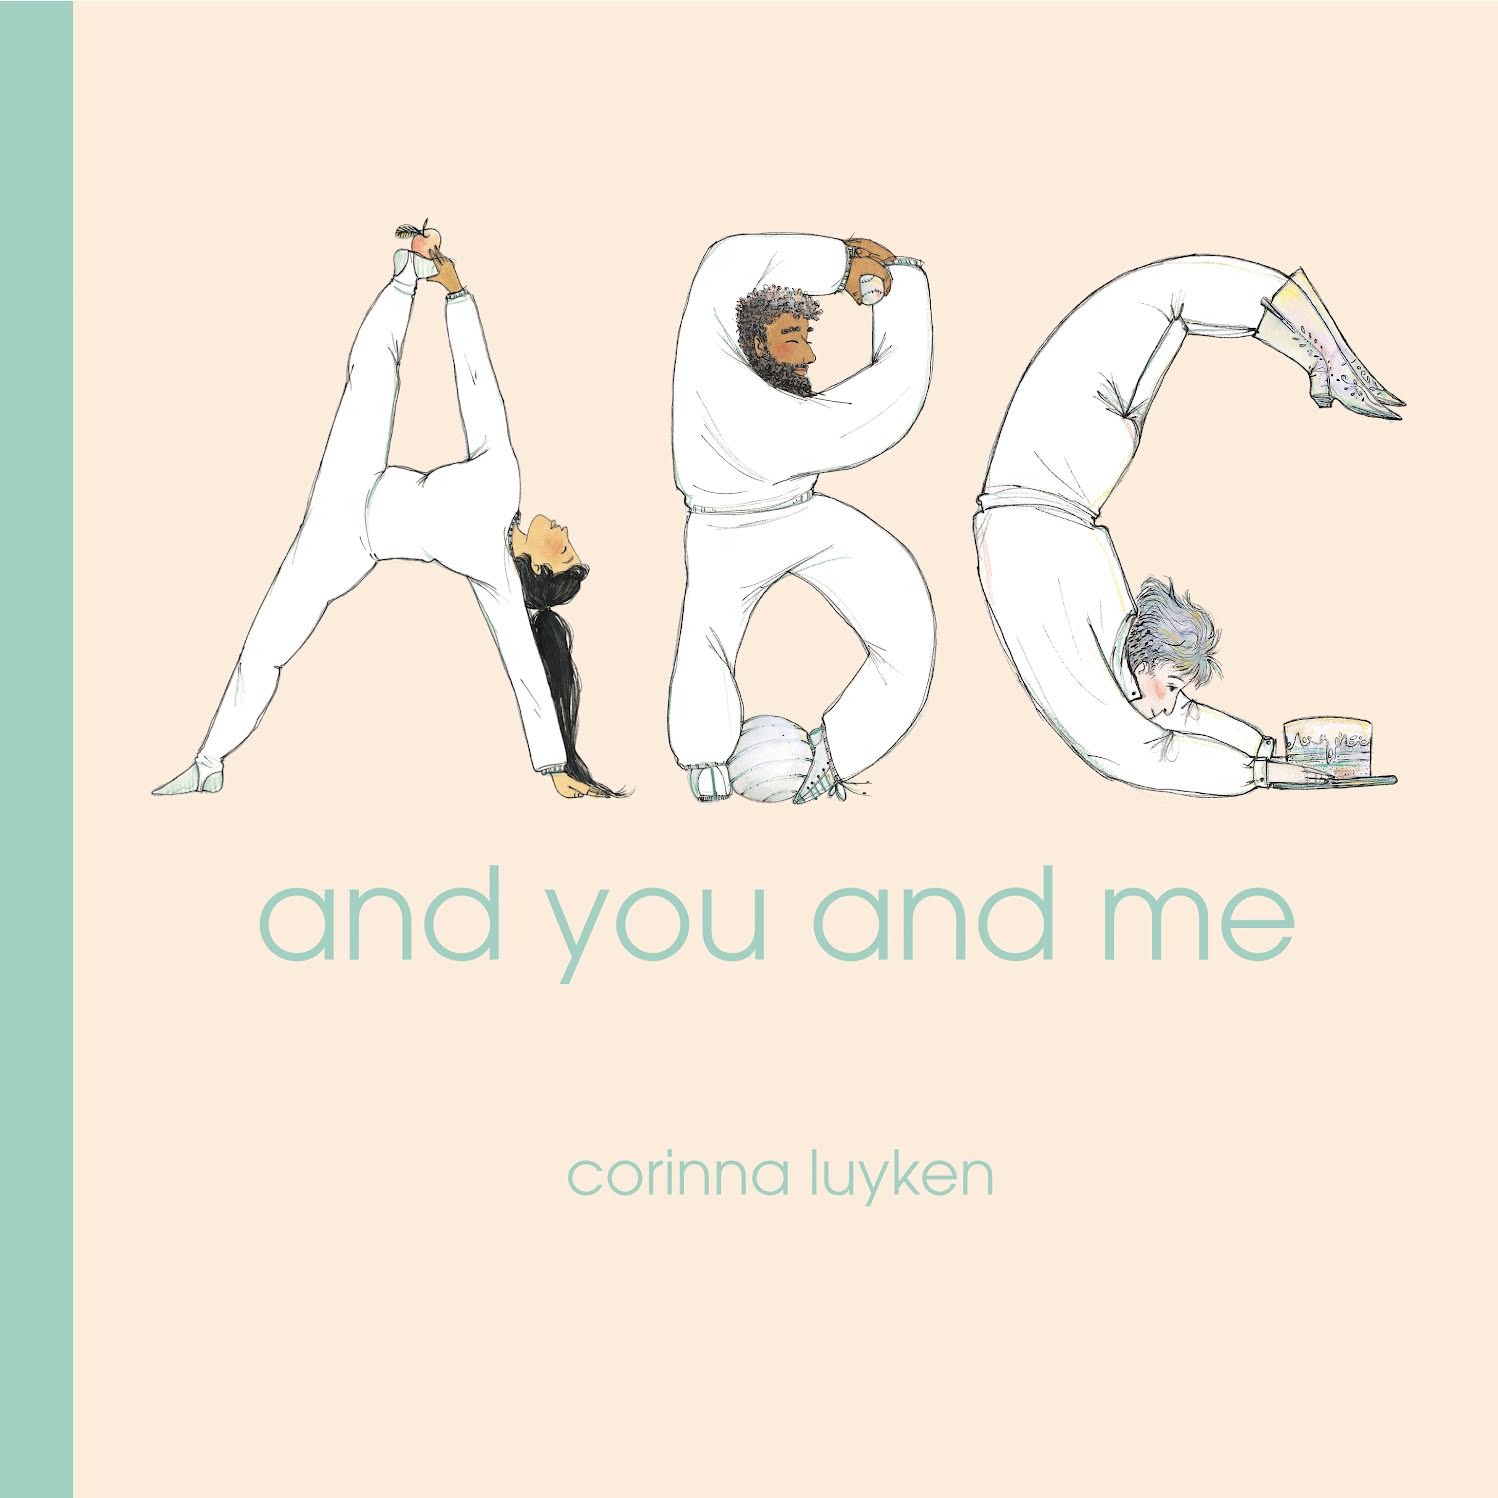 Abecedarian Movement and Dance: A Q&A with Corinna Luyken About ABC and You and Me!